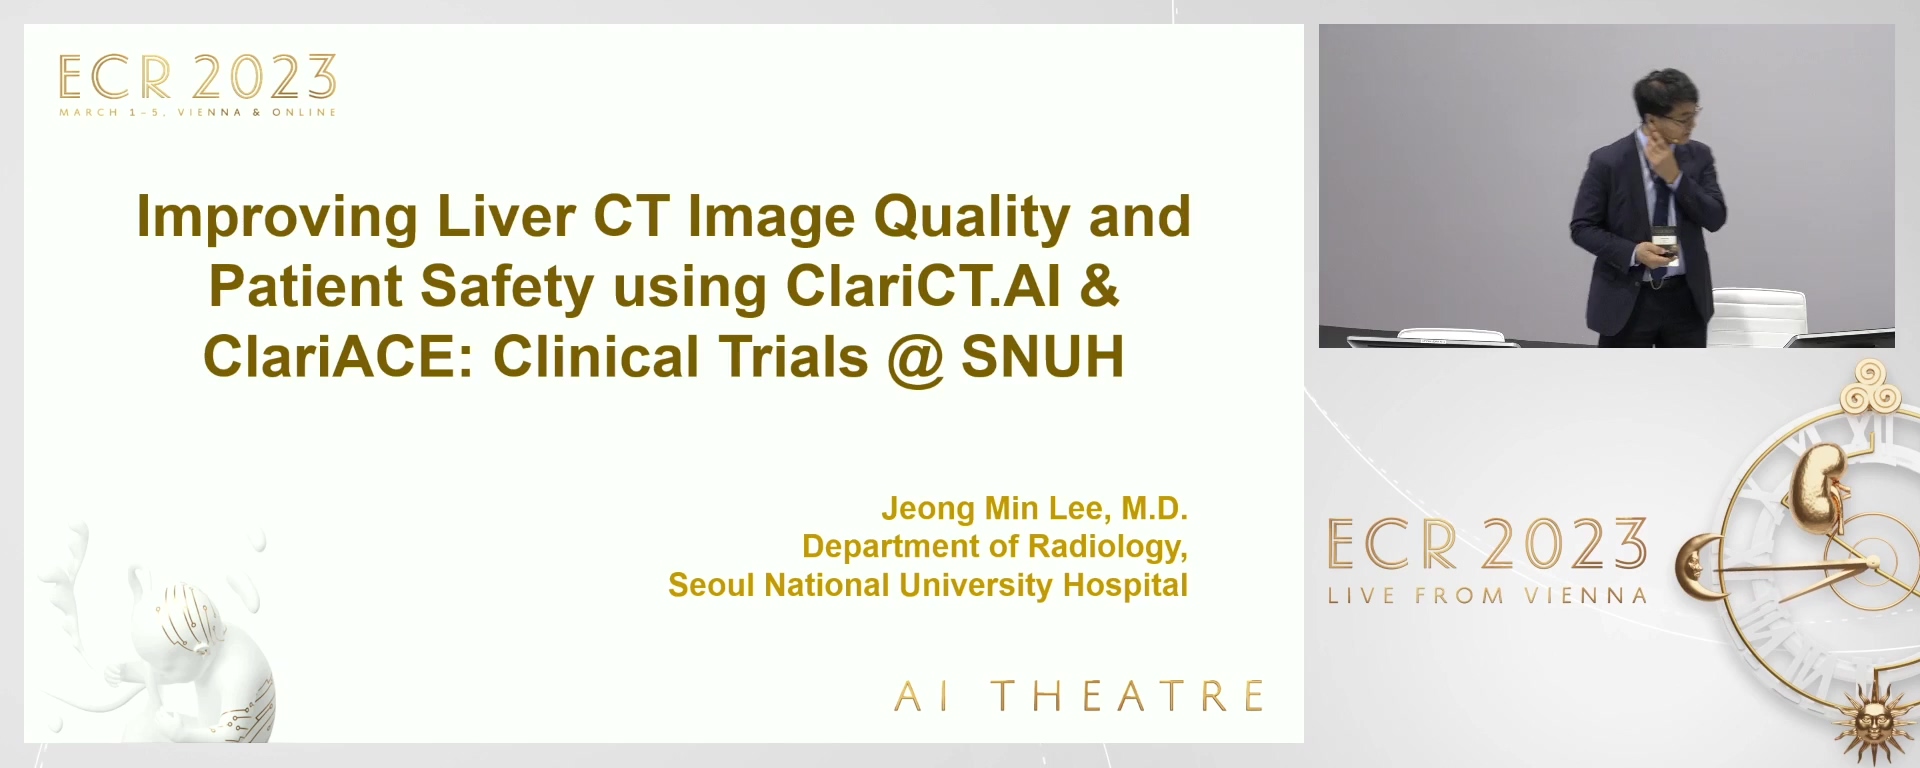 Is ultra-low-dose CT possible in liver imaging with deep learning? Report of pivotal multicenter prospective clinical trial with ClariCT.AI